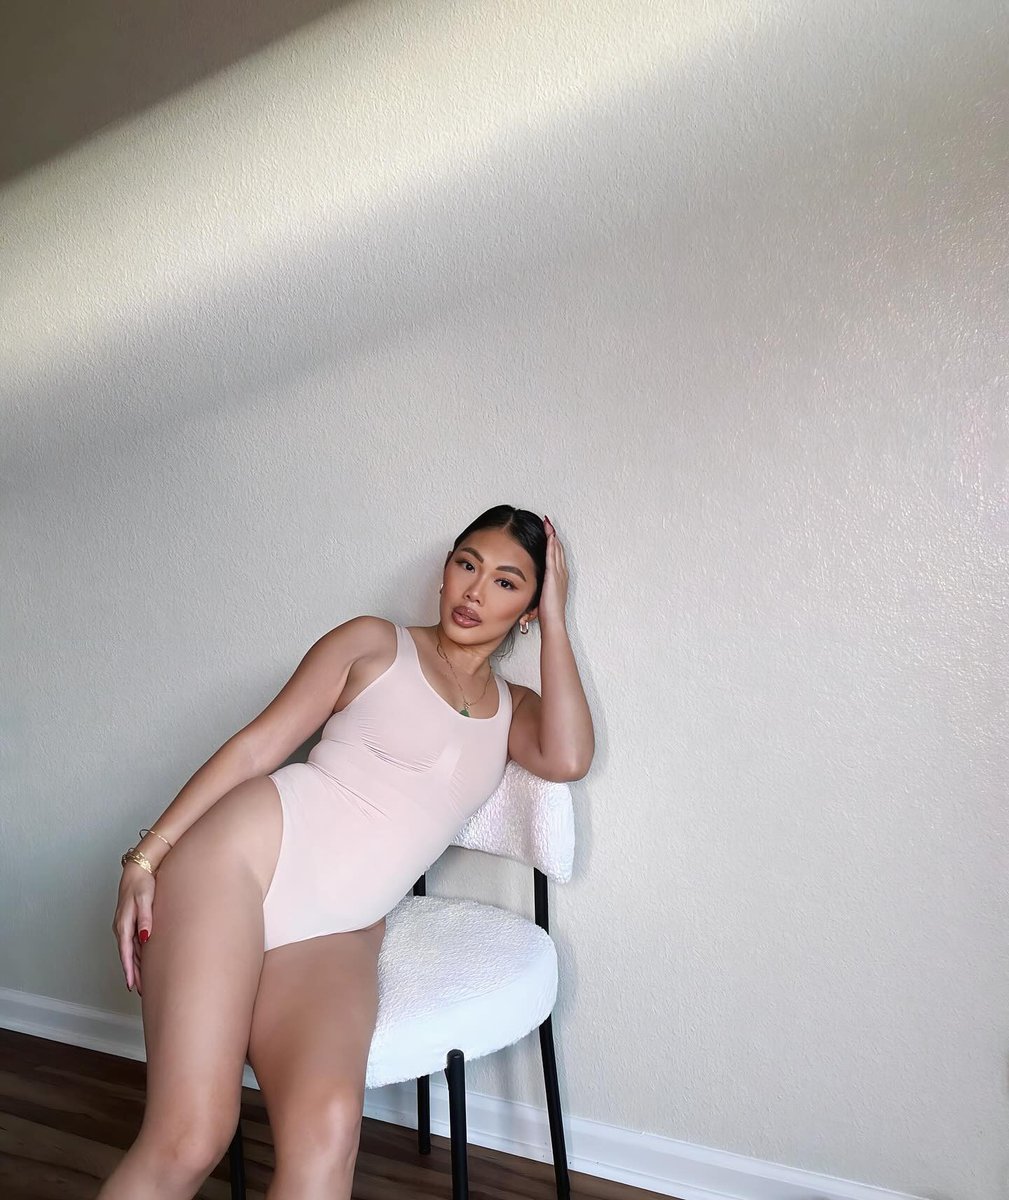 All smiles when ur feelin' snatched in Nearly Naked 💯 @ykcivs If ur closet's craving some new new, head to Yitty.com while our weekend sale is still live for a whole lotta $$$avings.